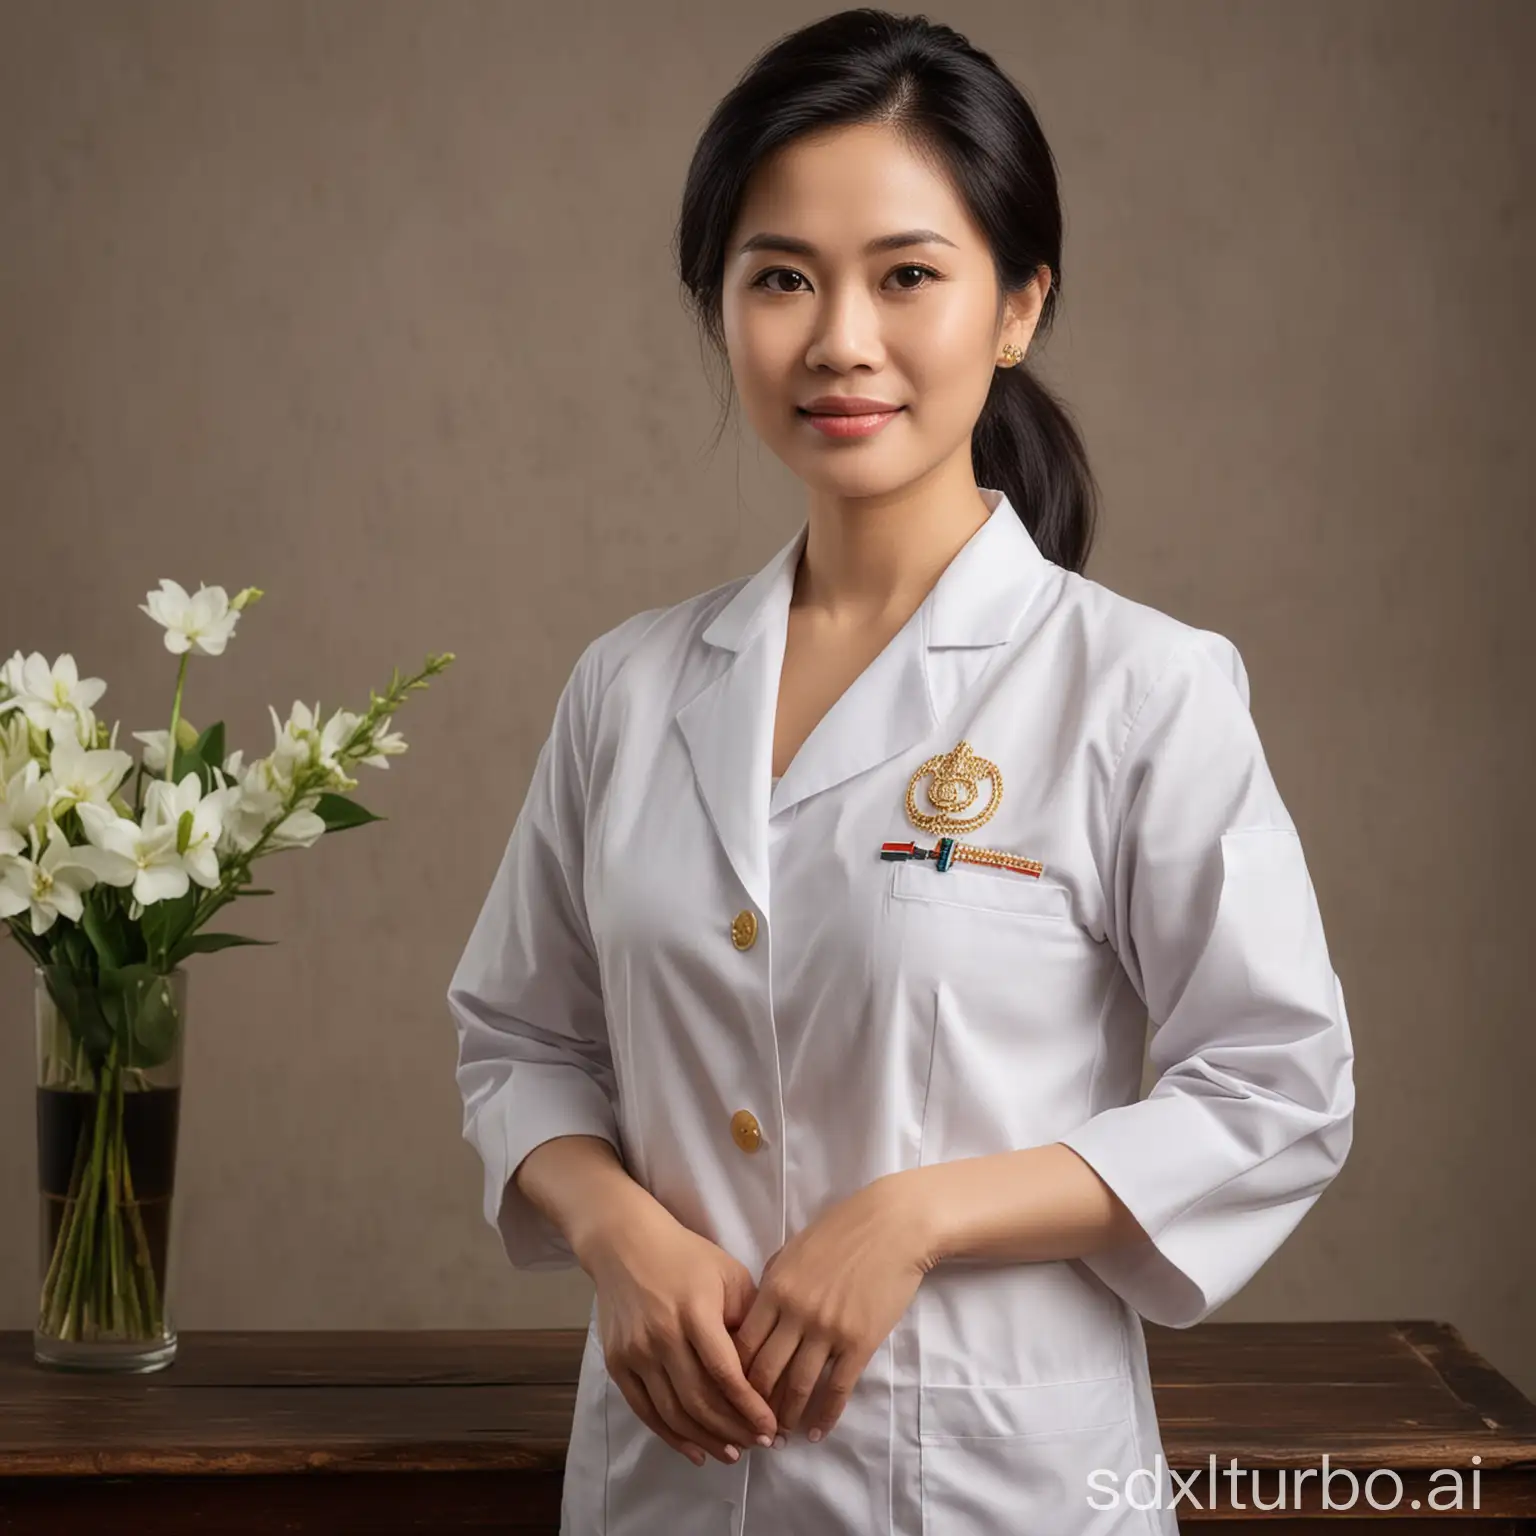 Thai-Female-Doctor-Graceful-and-Generous-MiddleAged-Aesthetics